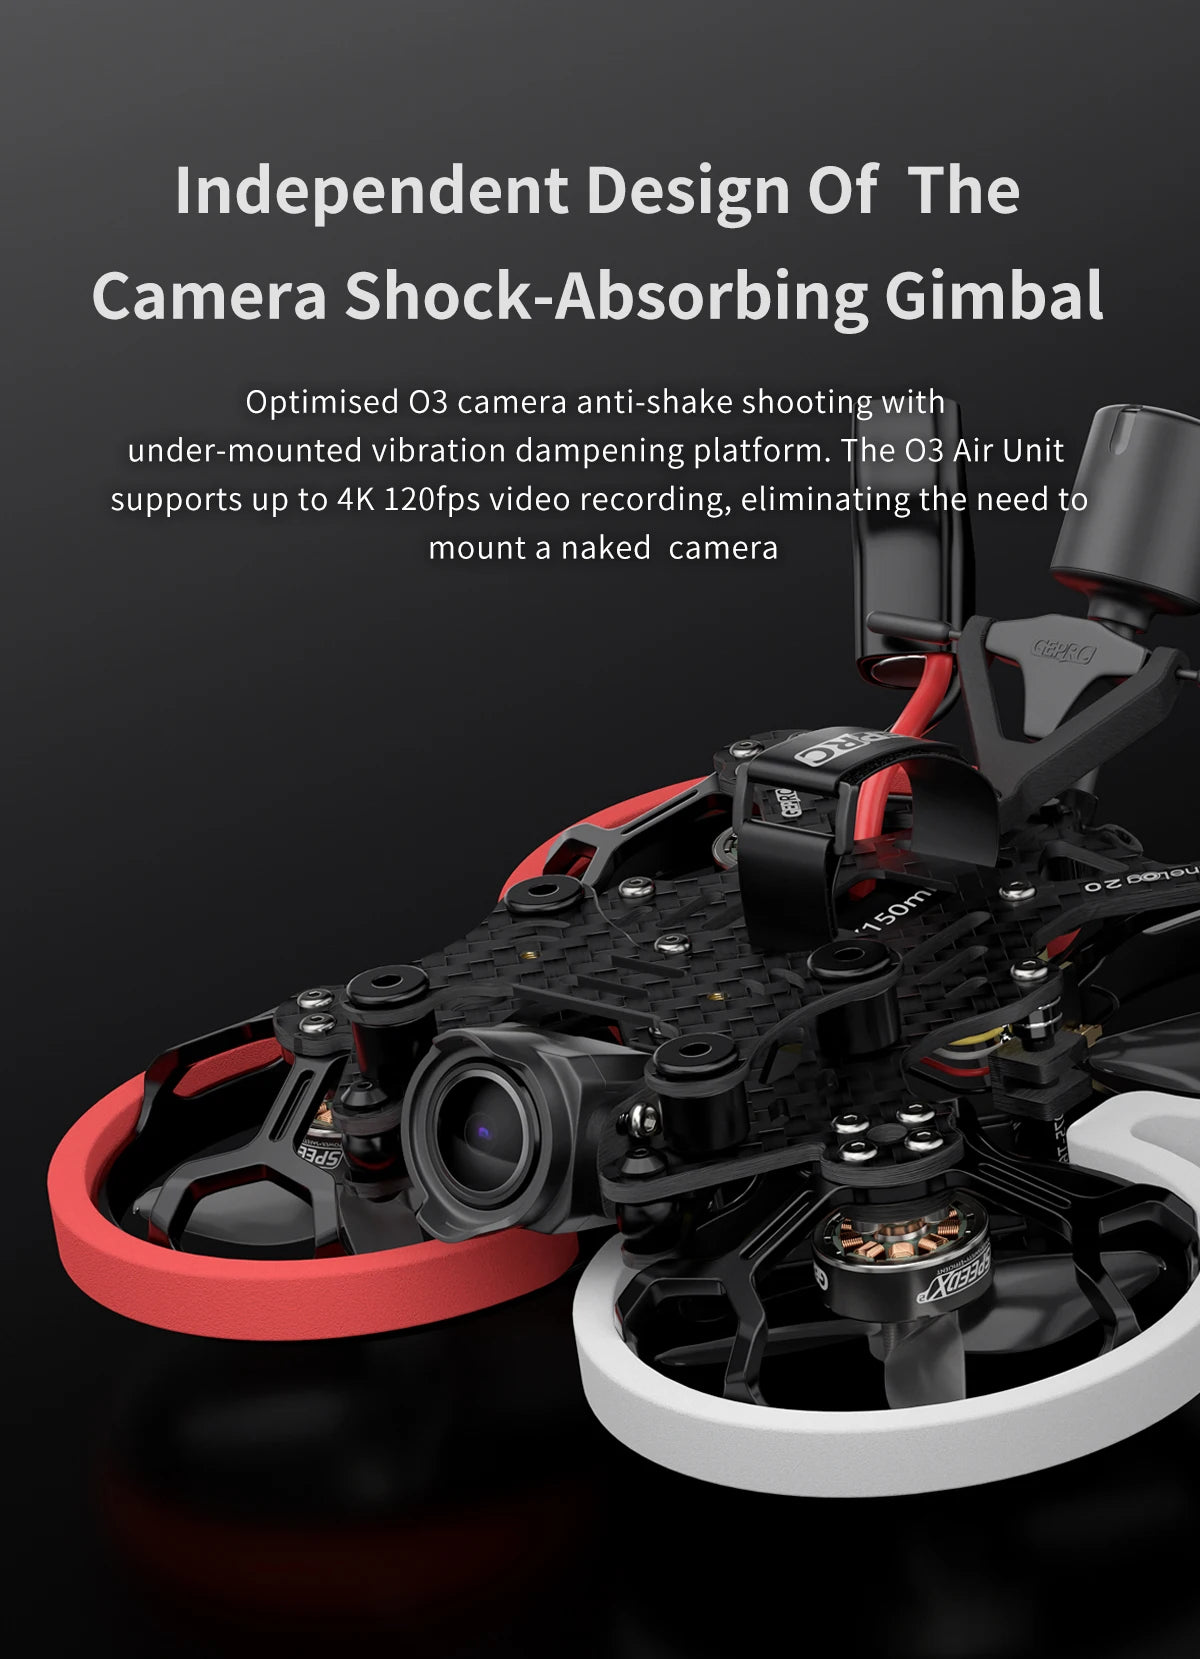 GEPRC Cinelog20 Analog FPV Drone, the 03 Air Unit supports up to 4K 120fps video recording . the camera